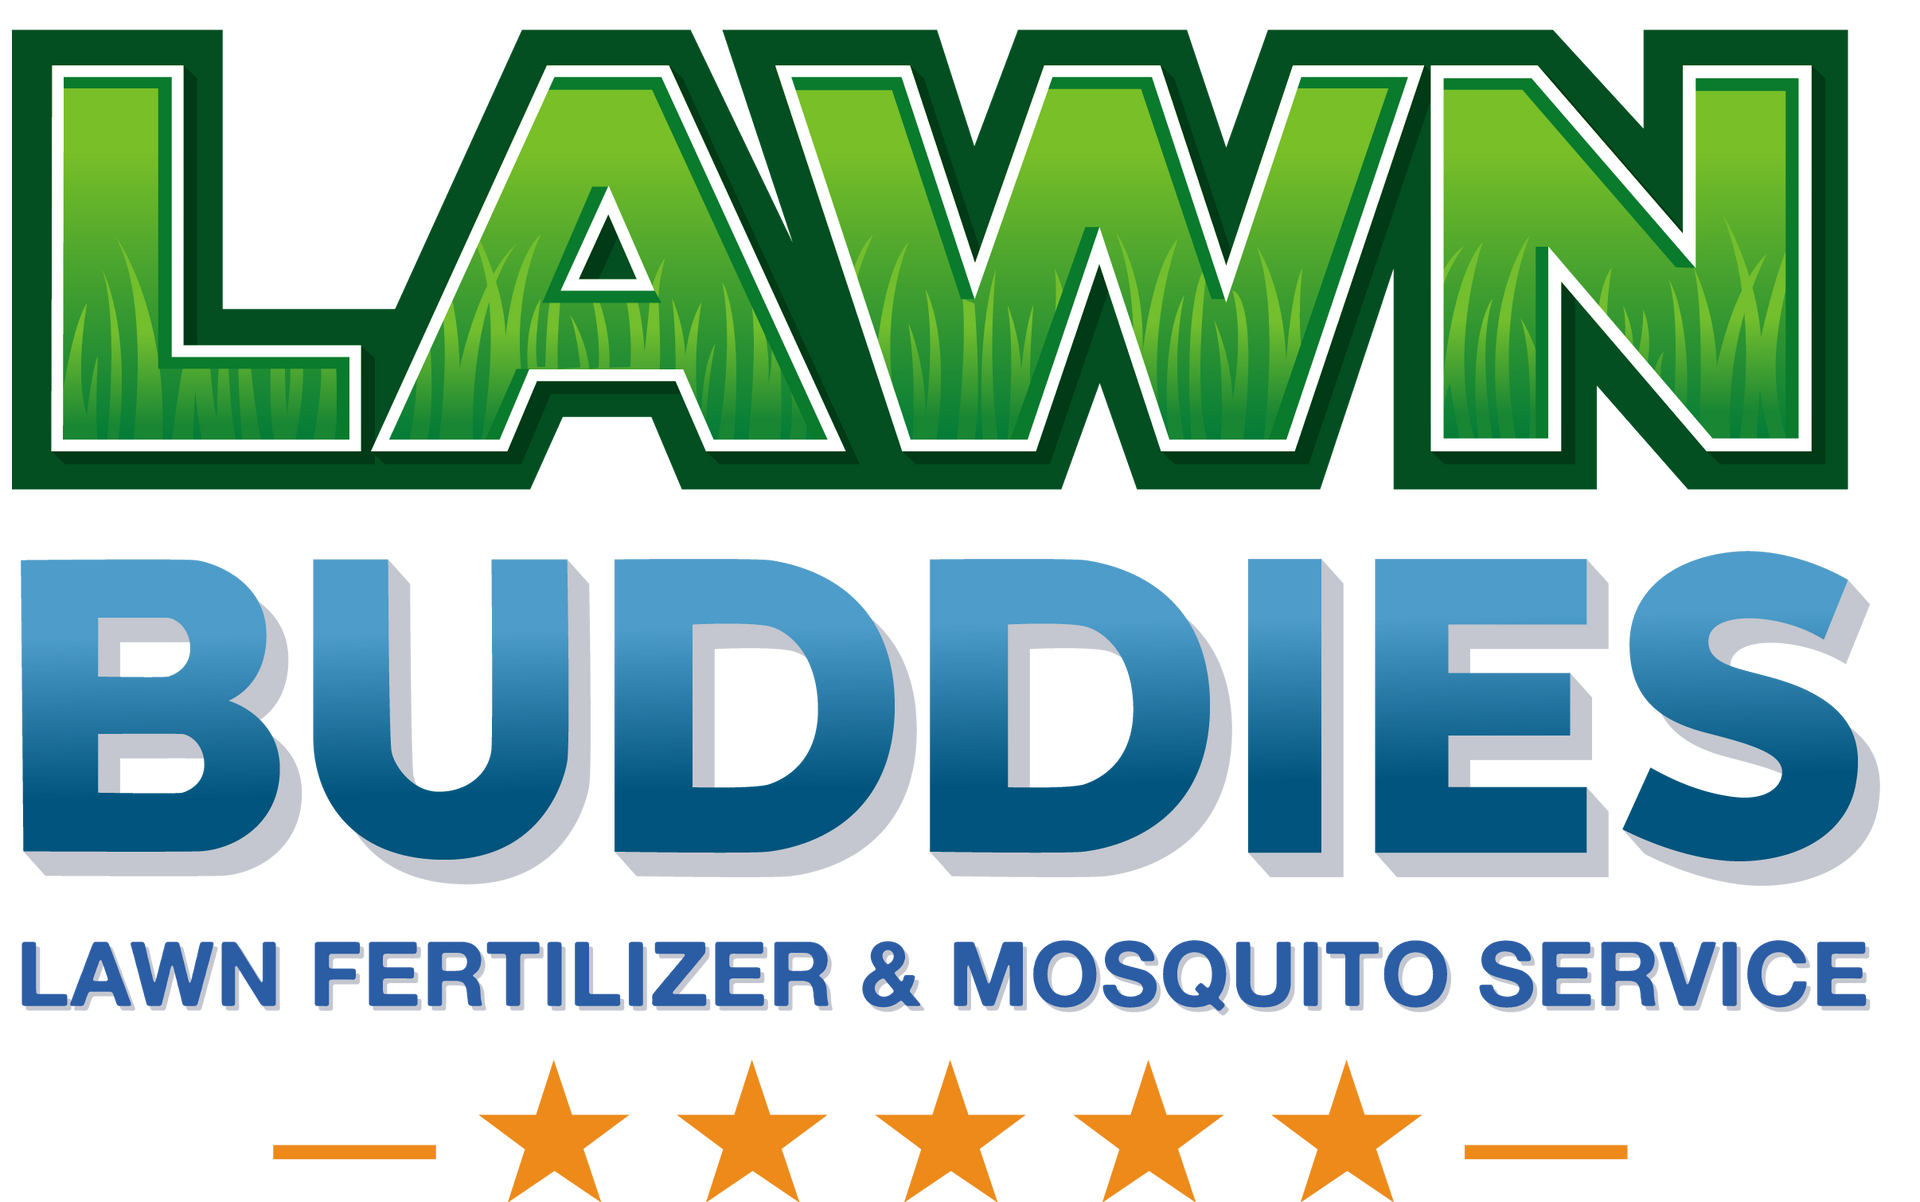 the logo for lawn buddies lawn fertilizer and mosquito service